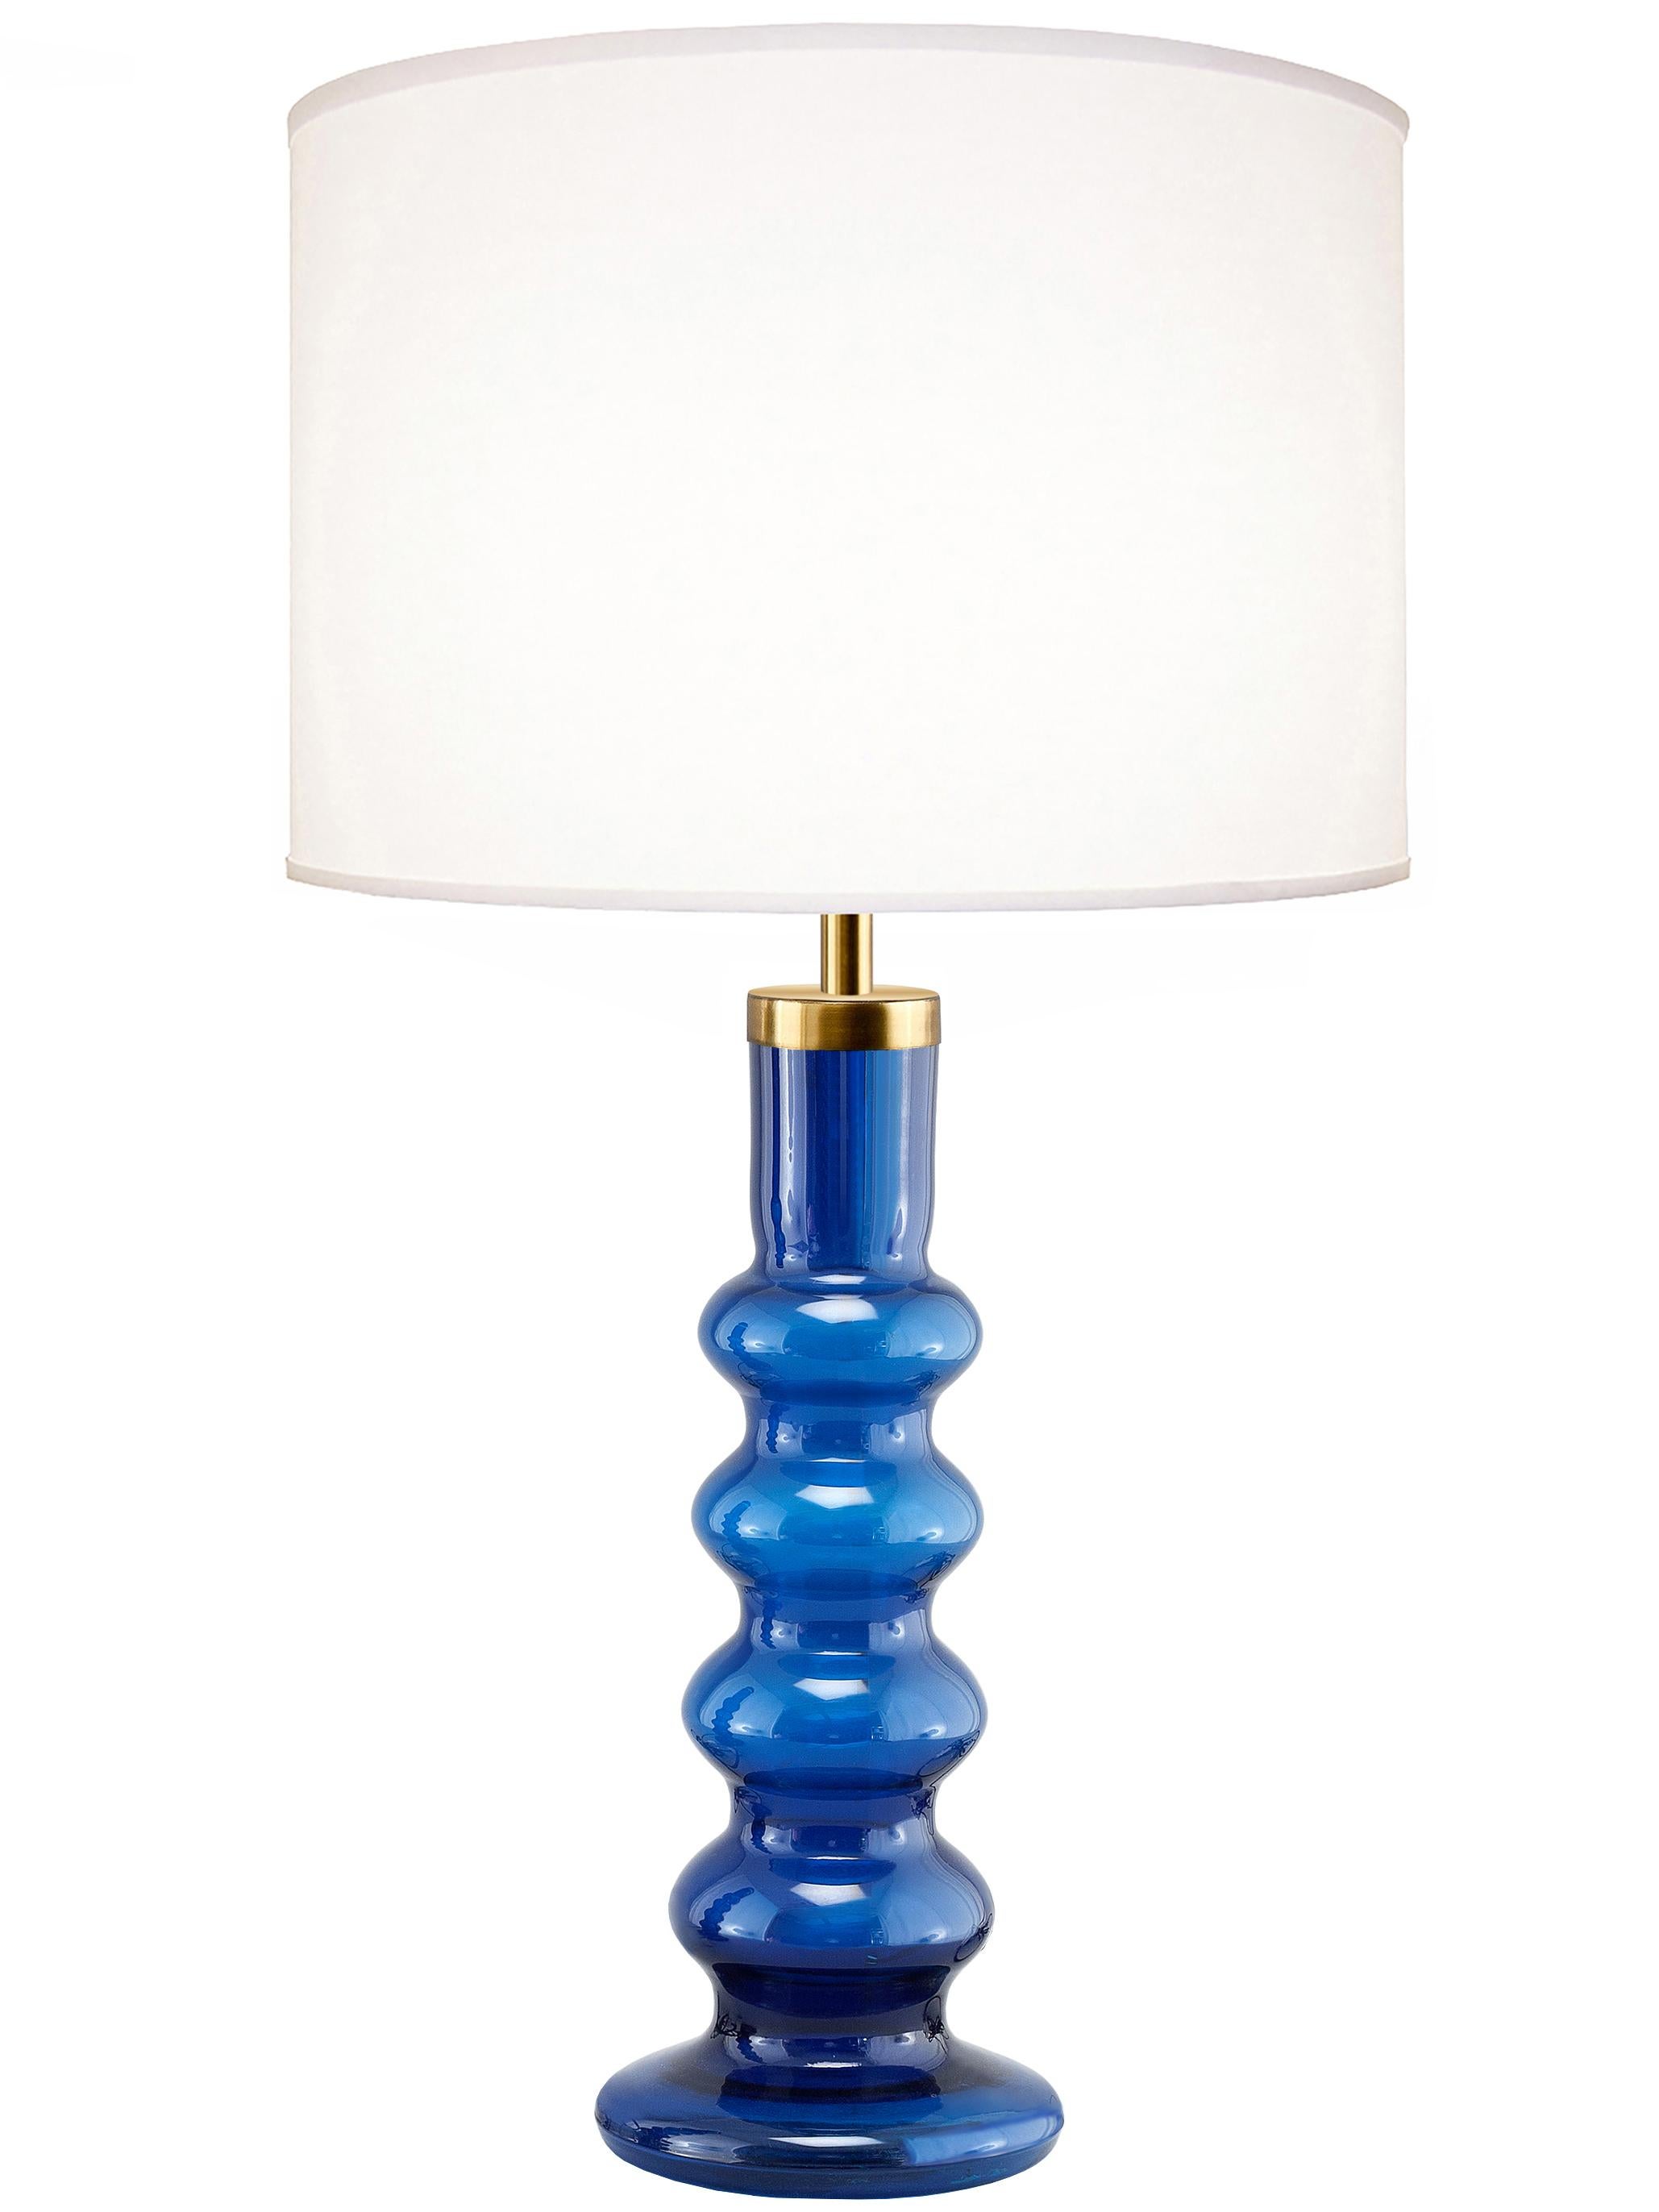 A pair of large blue glass lamps with brass hardware, Swedish, 1960s.